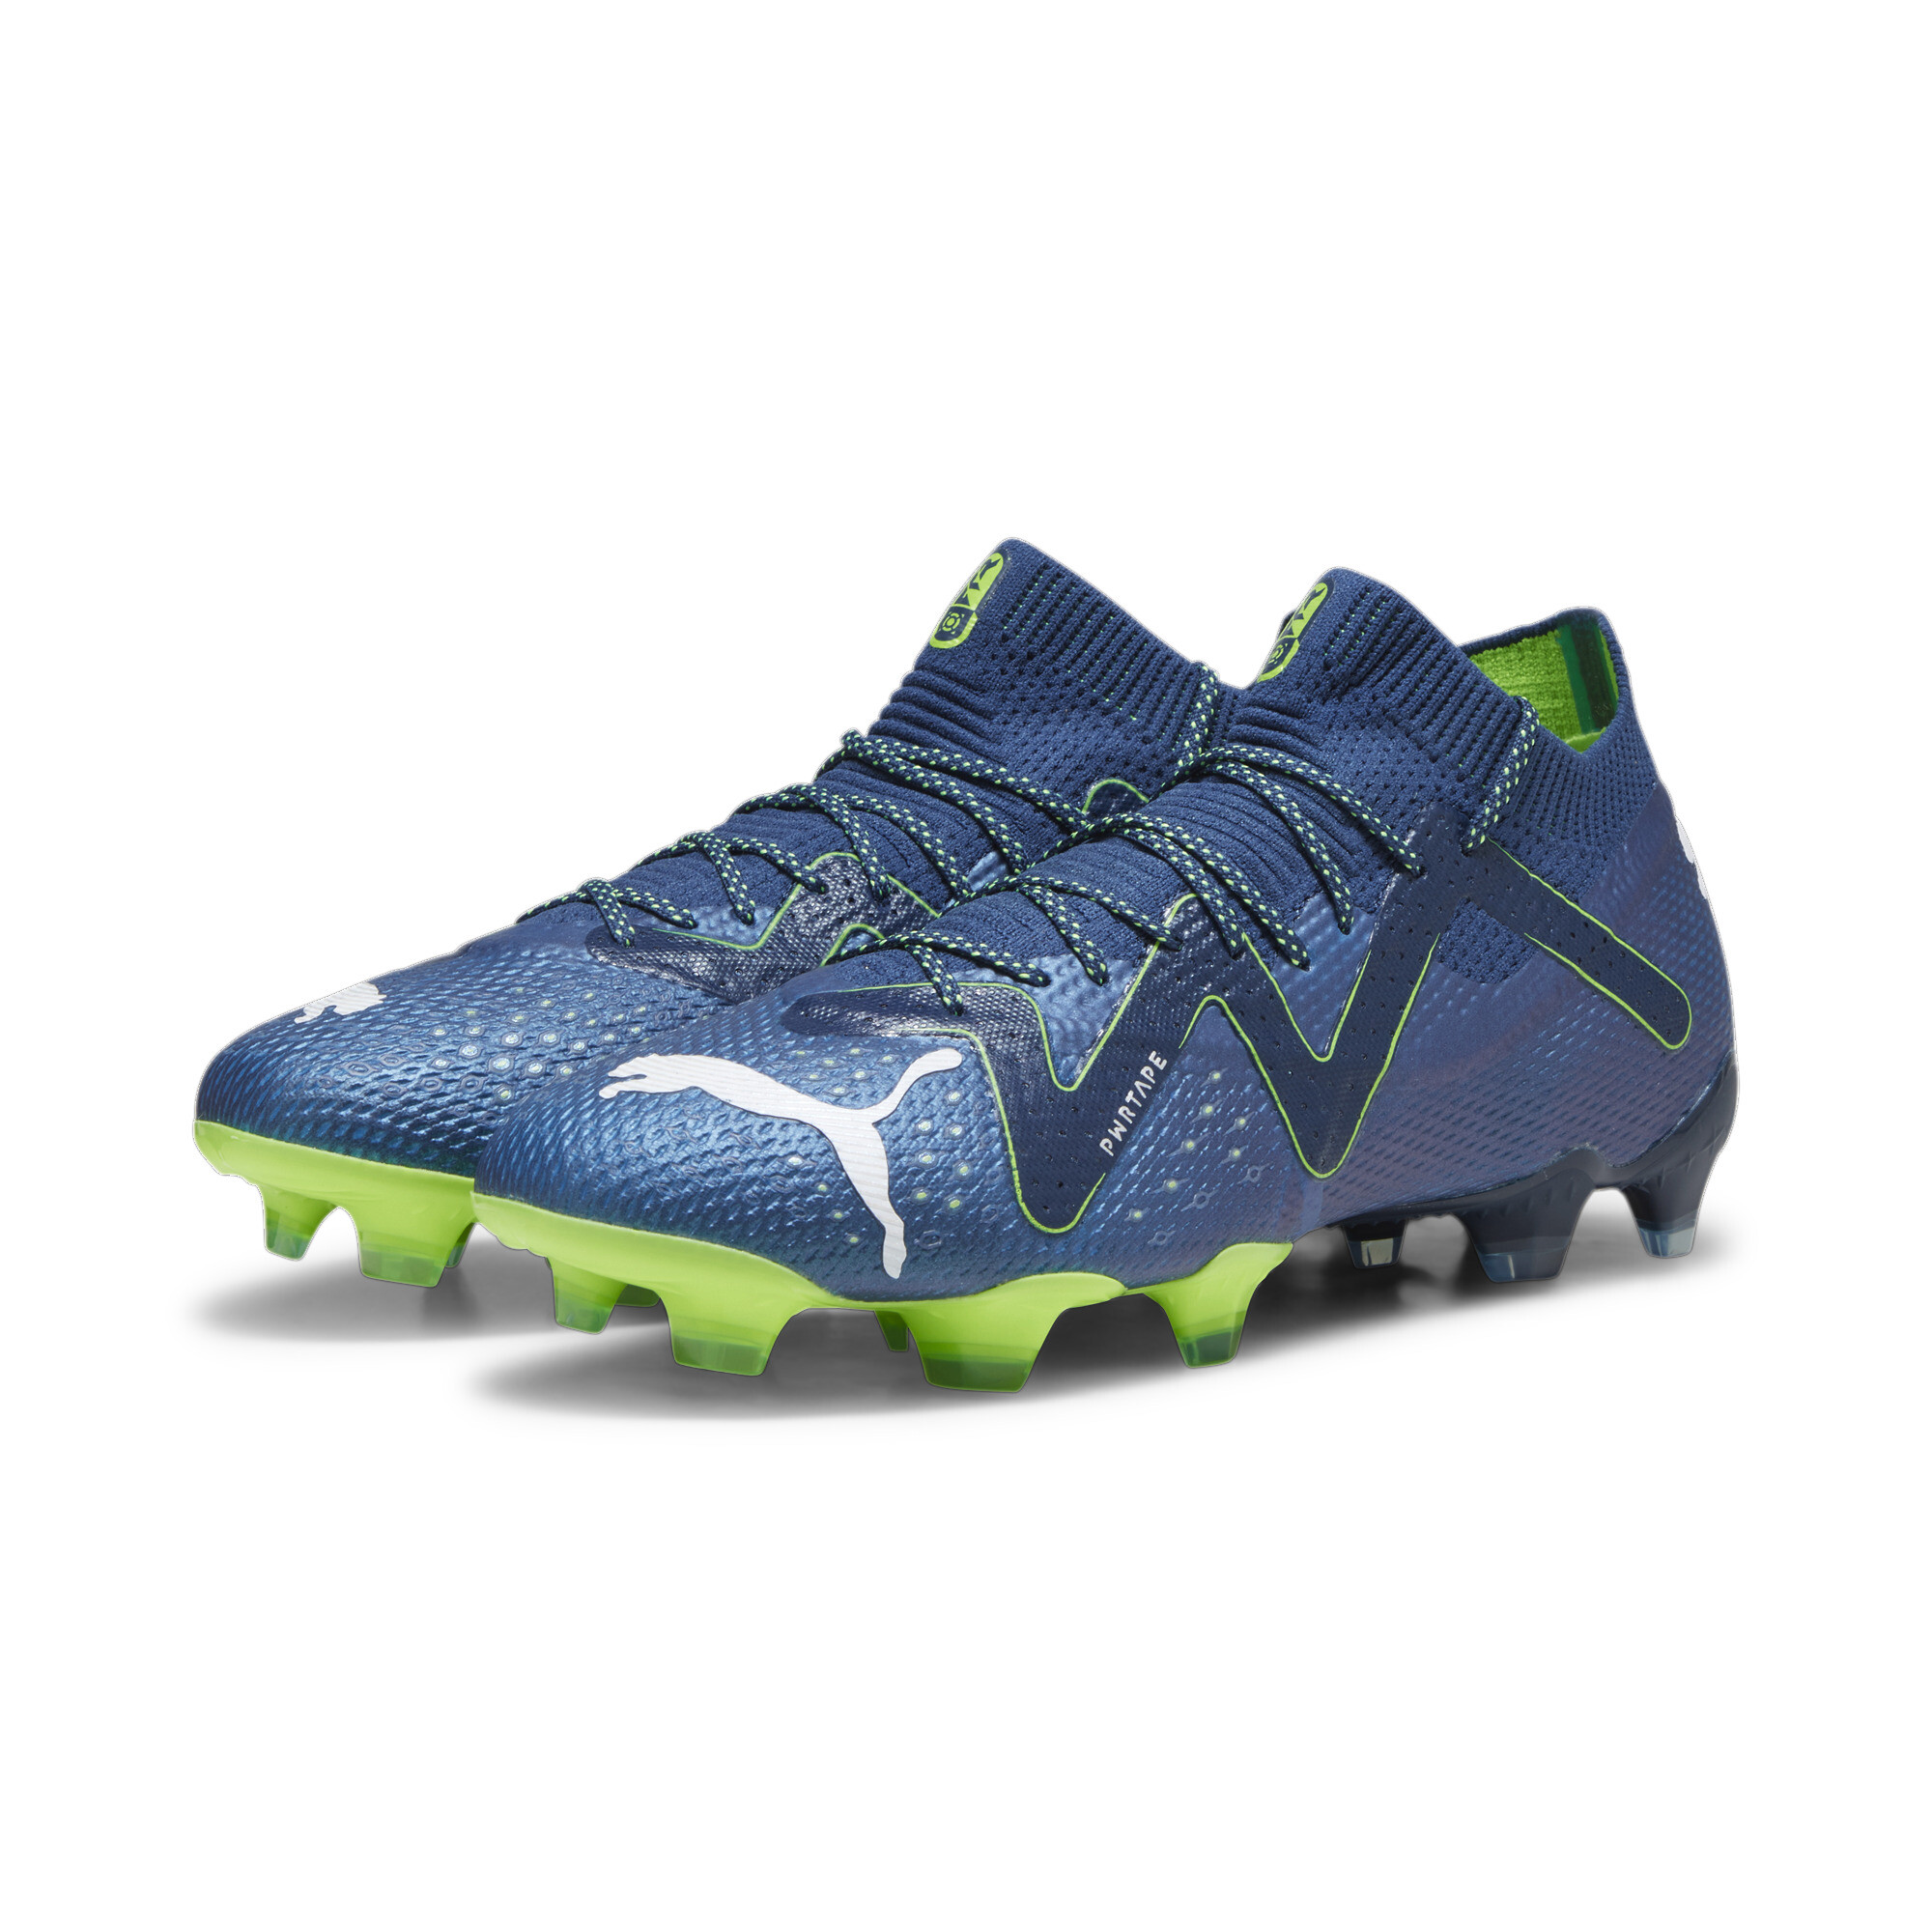 Women's Puma FUTURE ULTIMATE FG/AG's Football Boots, Blue, Size 38, Shoes